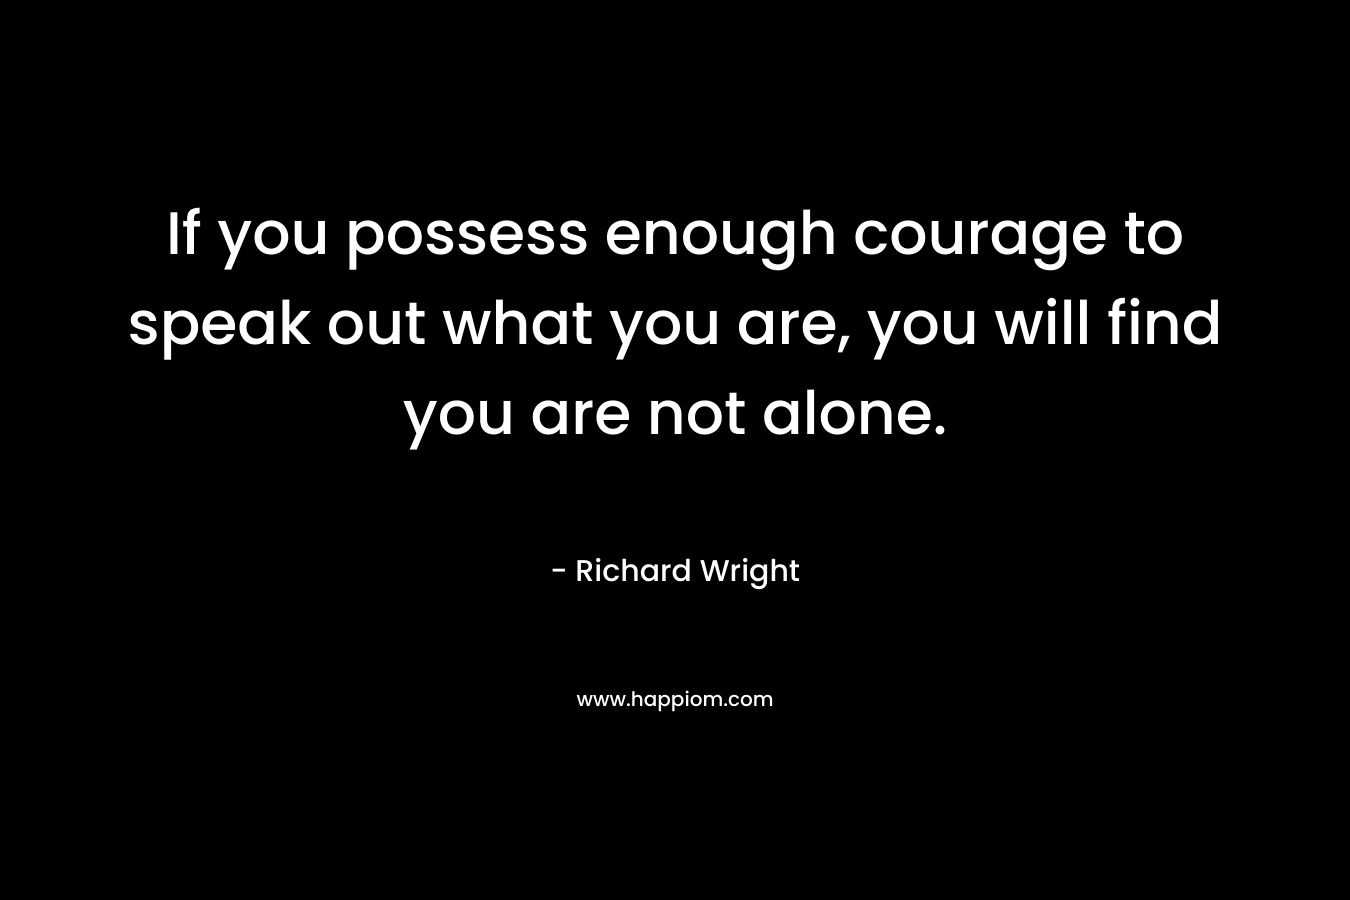 If you possess enough courage to speak out what you are, you will find you are not alone. – Richard Wright